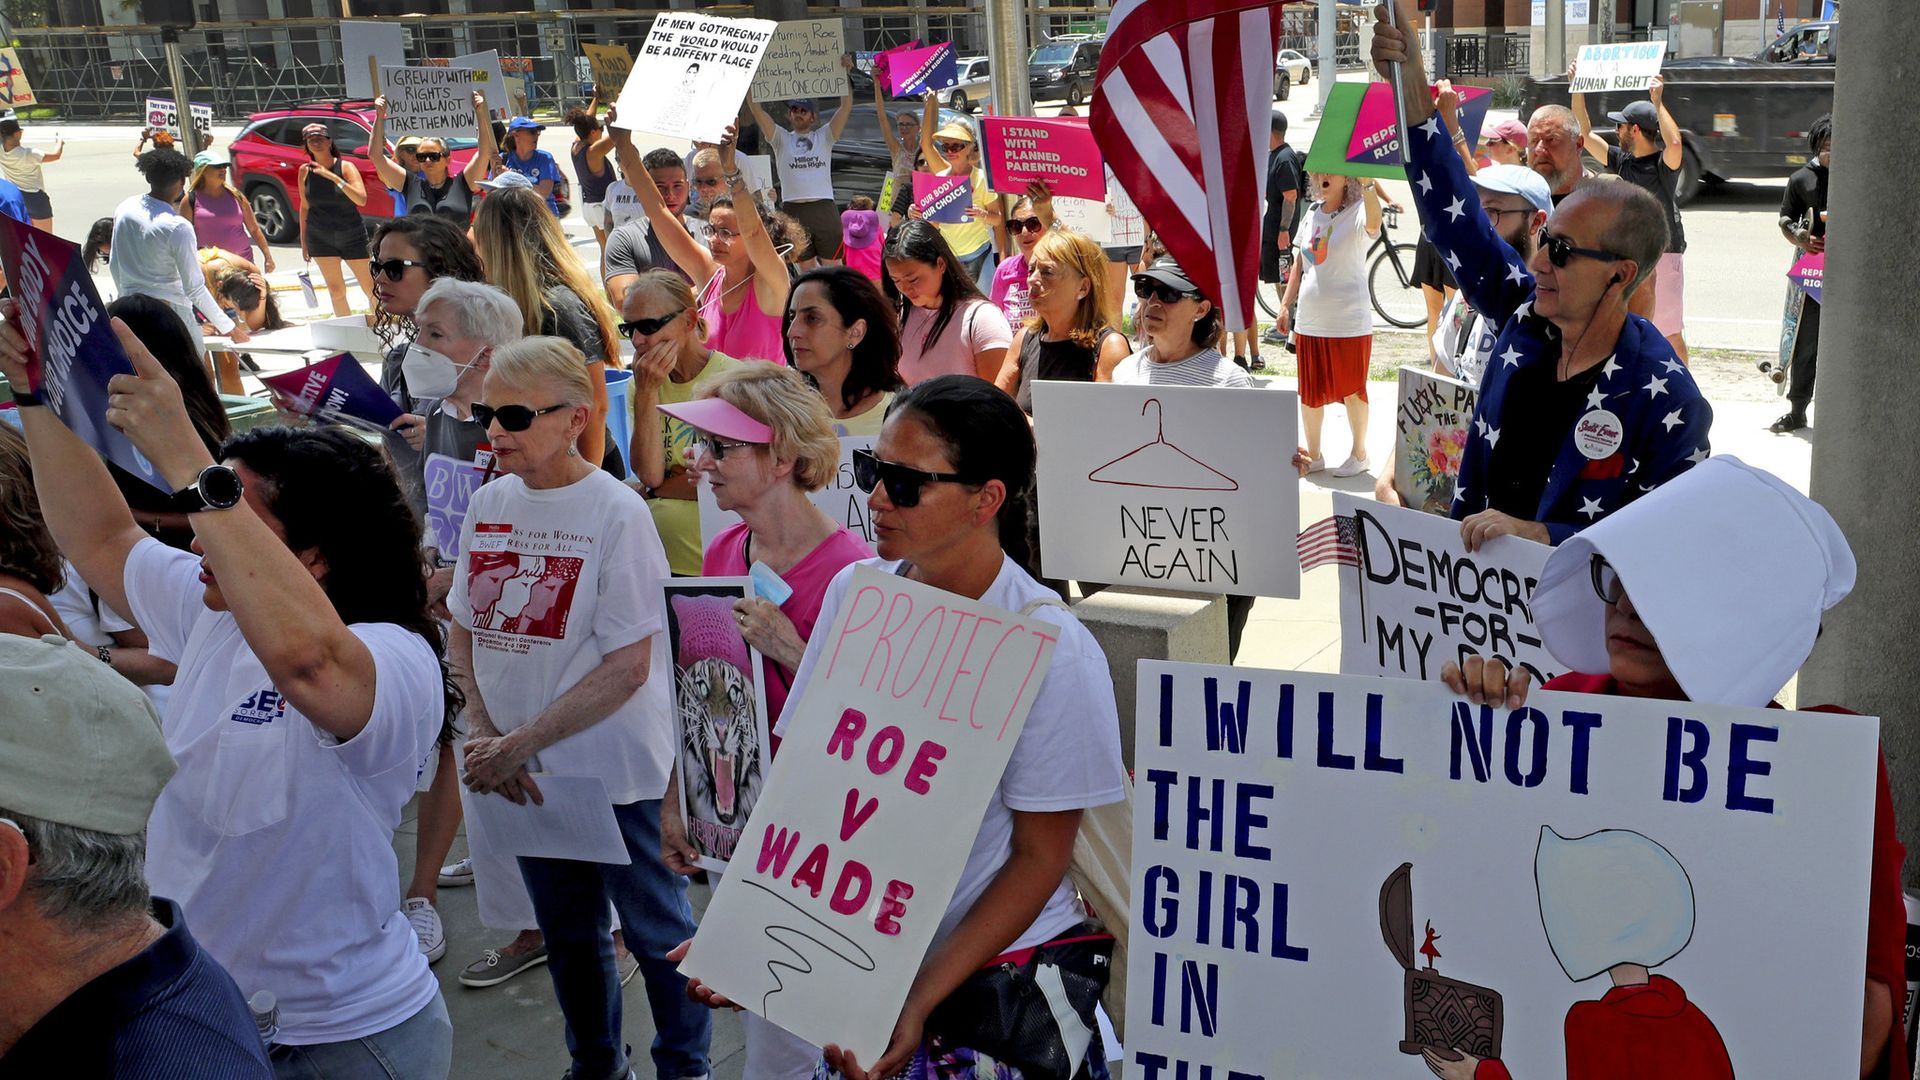 People gather on the steps of the Federal Courthouse in Fort Lauderdale on May 7, 2022 for a rally to support abortion rights